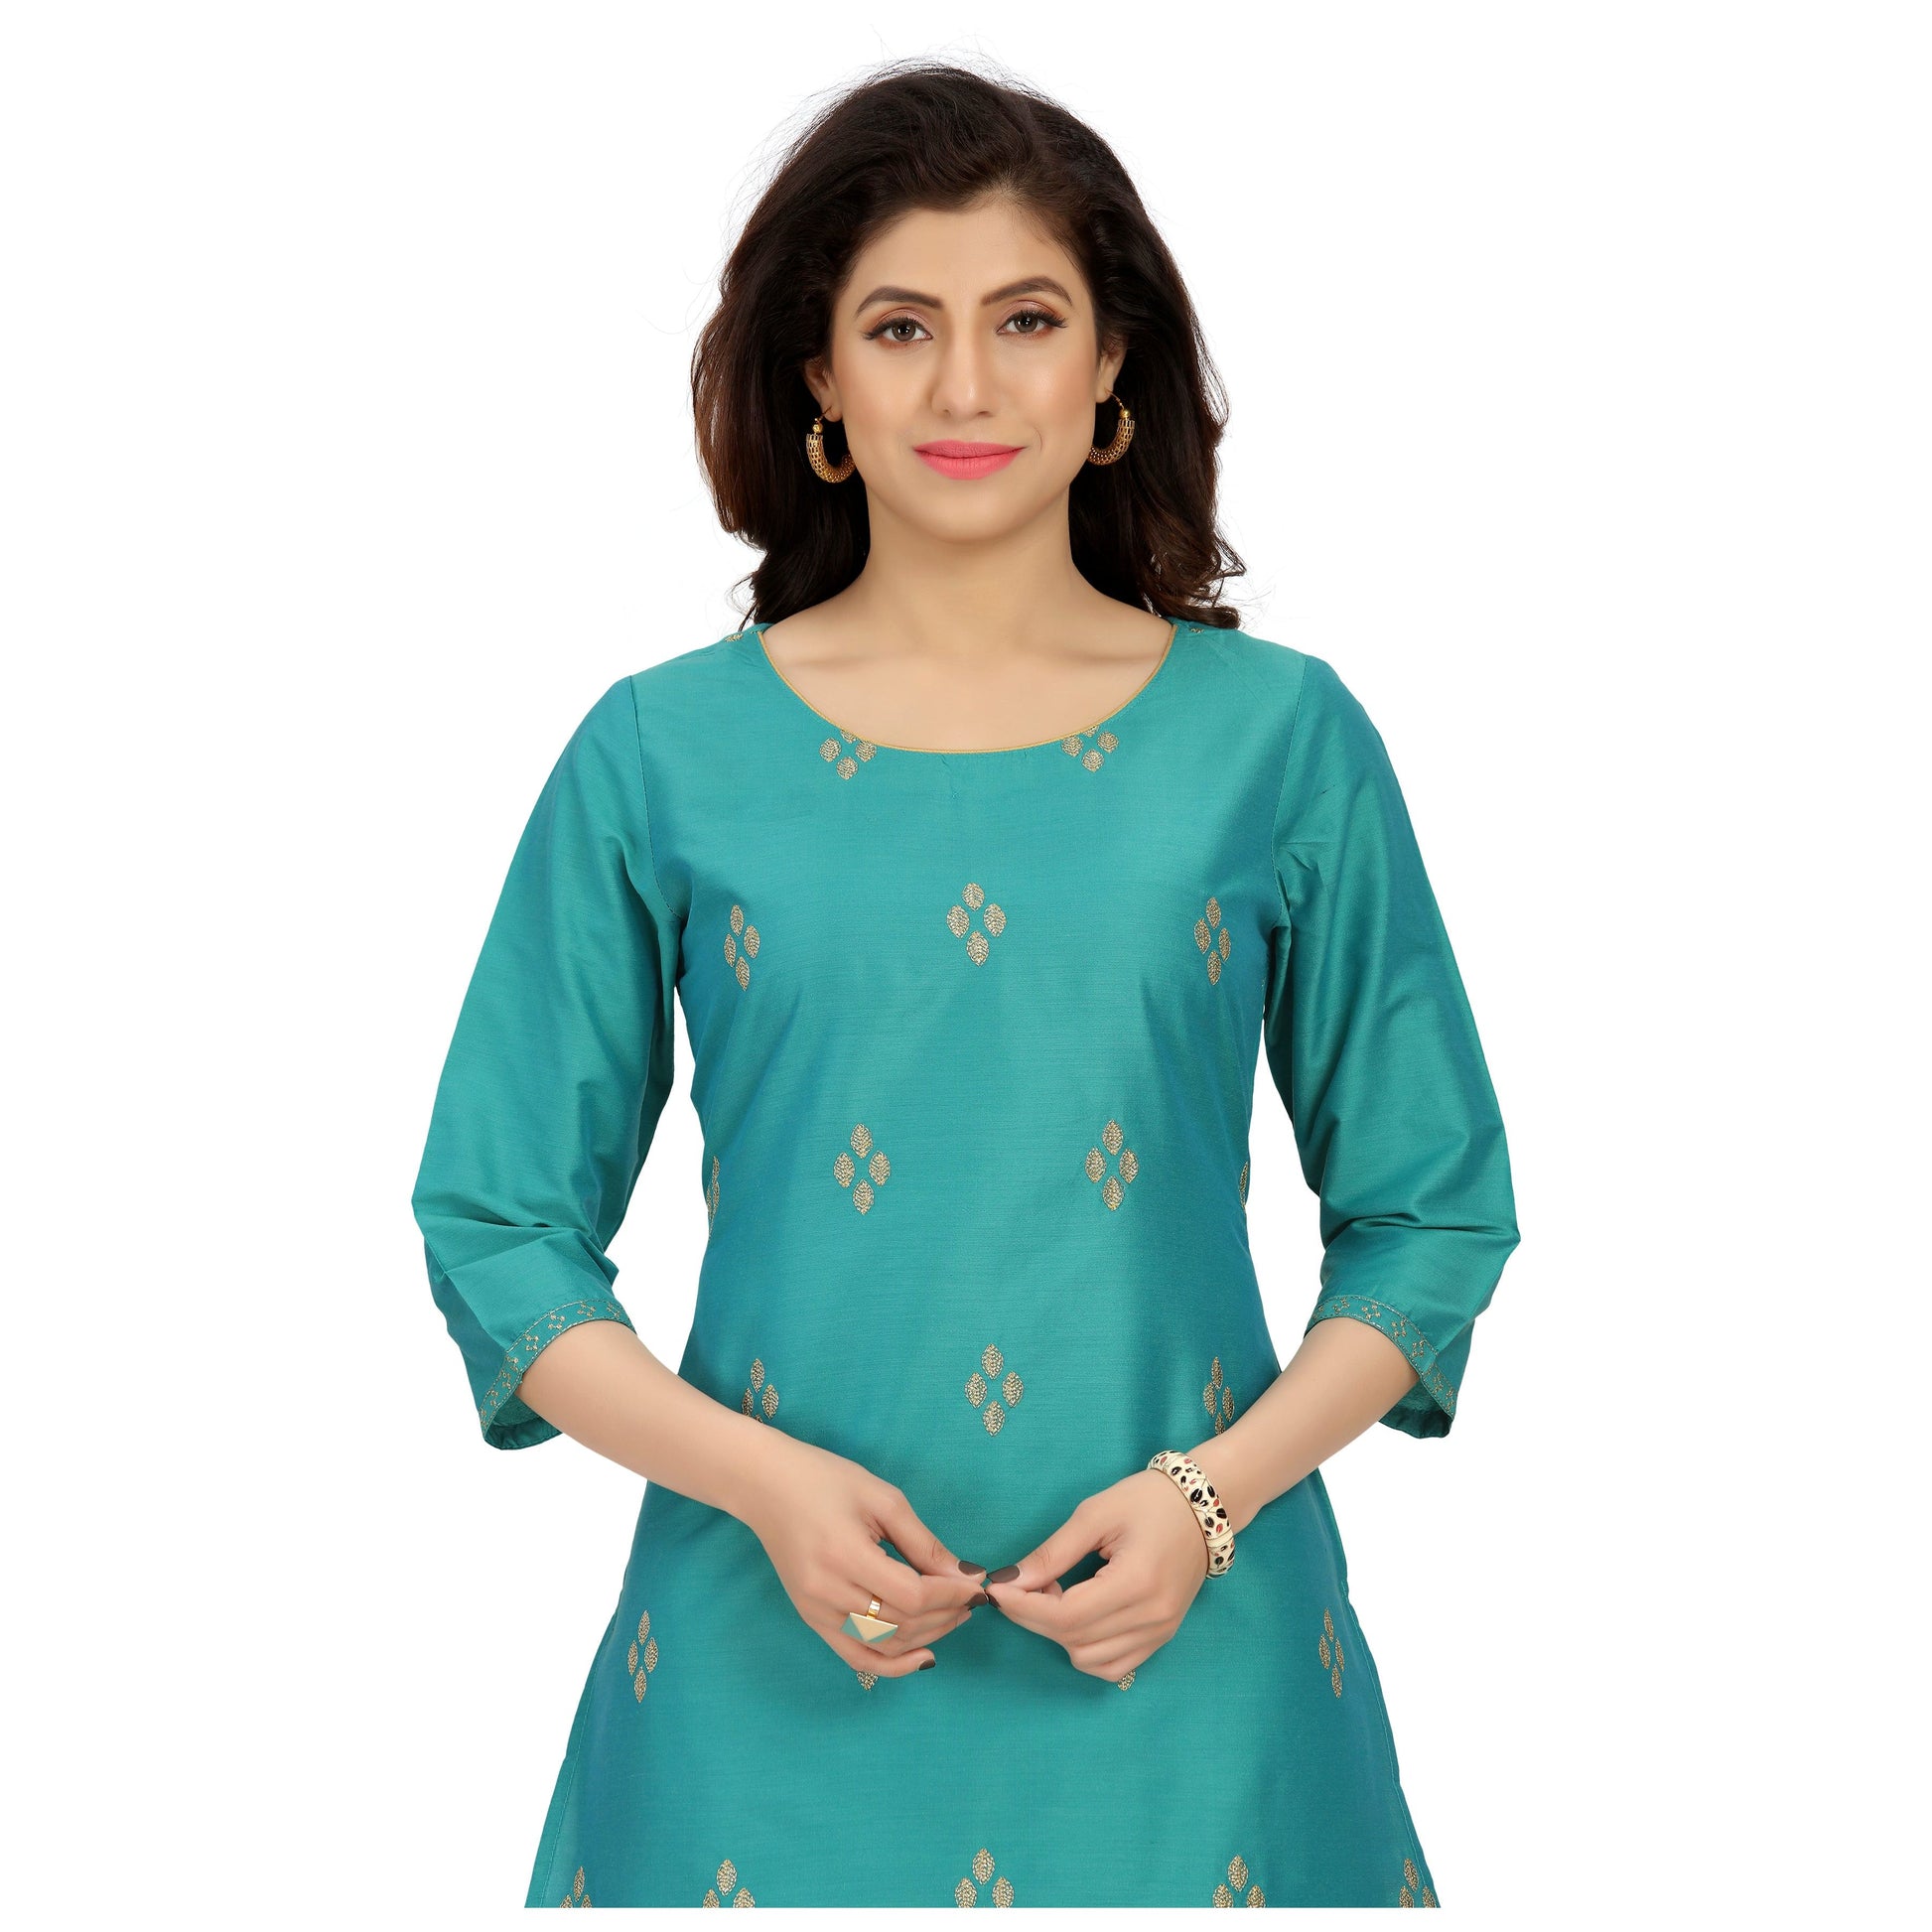 Simple, easy and elegant green kurta with small gold prints all over. Cotton silk material with 3/4th sleeves, the kurti is ideal for family lunch, festive wear or party wear. 